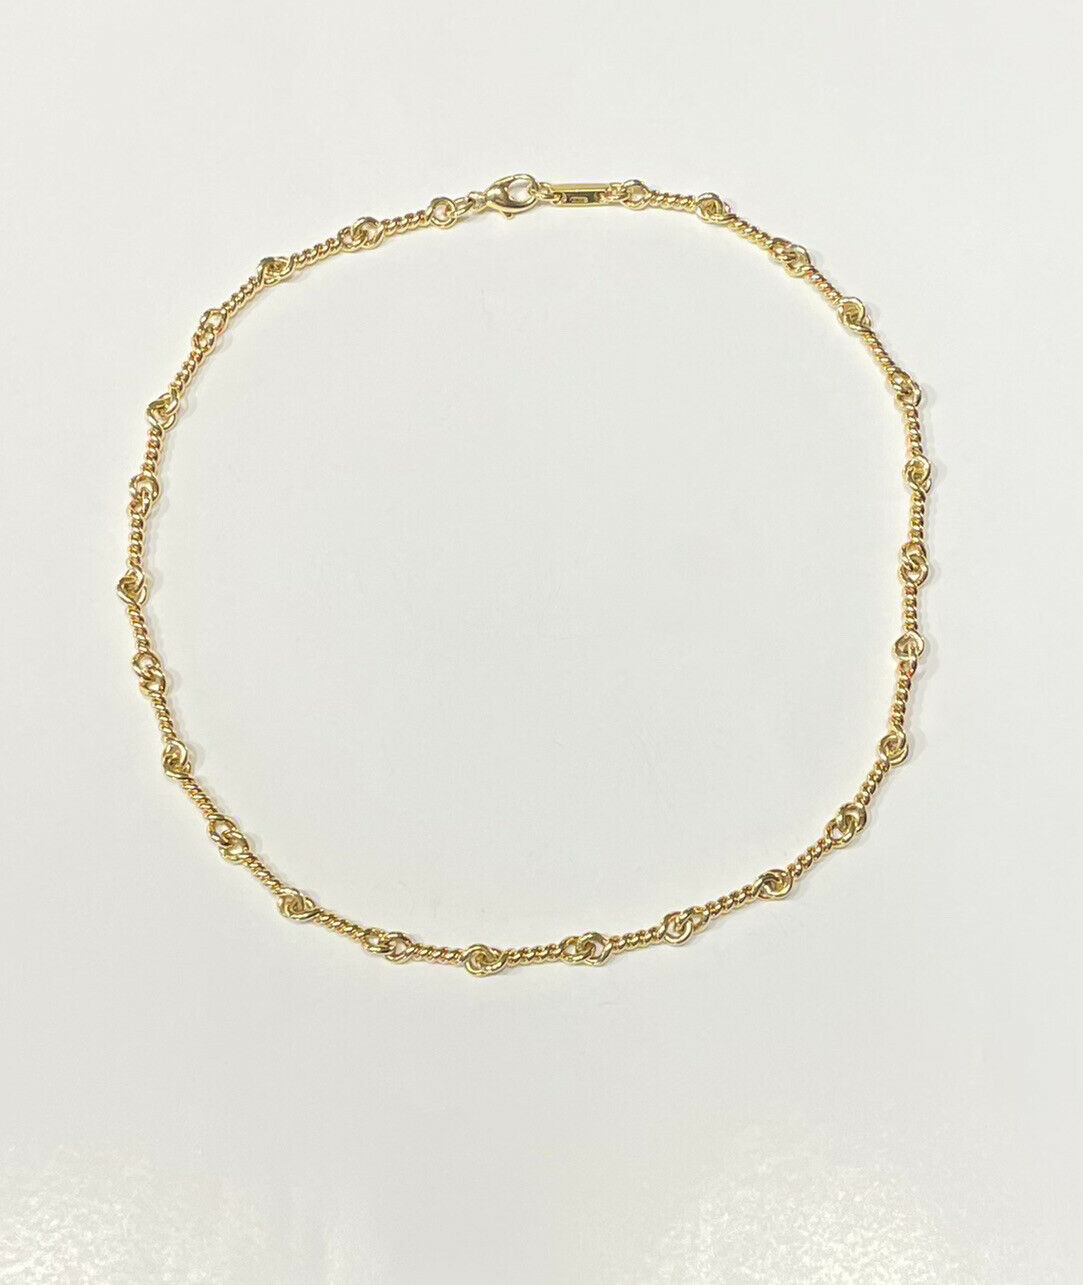 SOLD Bvlgari 18k Yellow Gold Chain Link Necklace